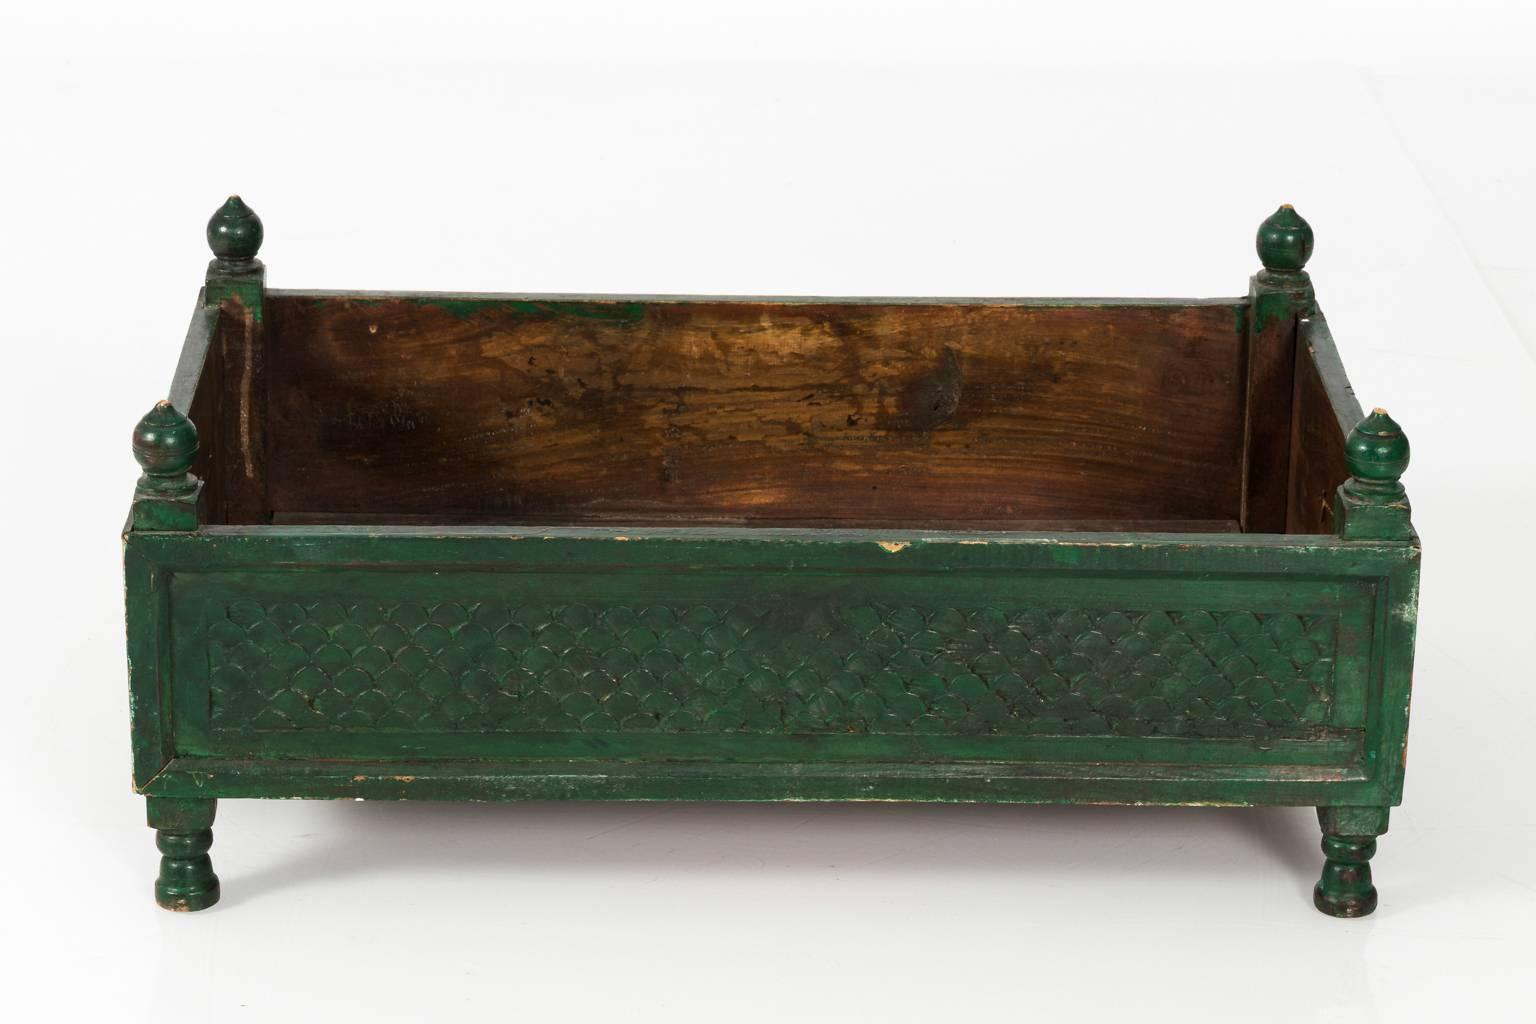 Green painted wood box with finials and fish scale carvings, circa early 20th century.
 